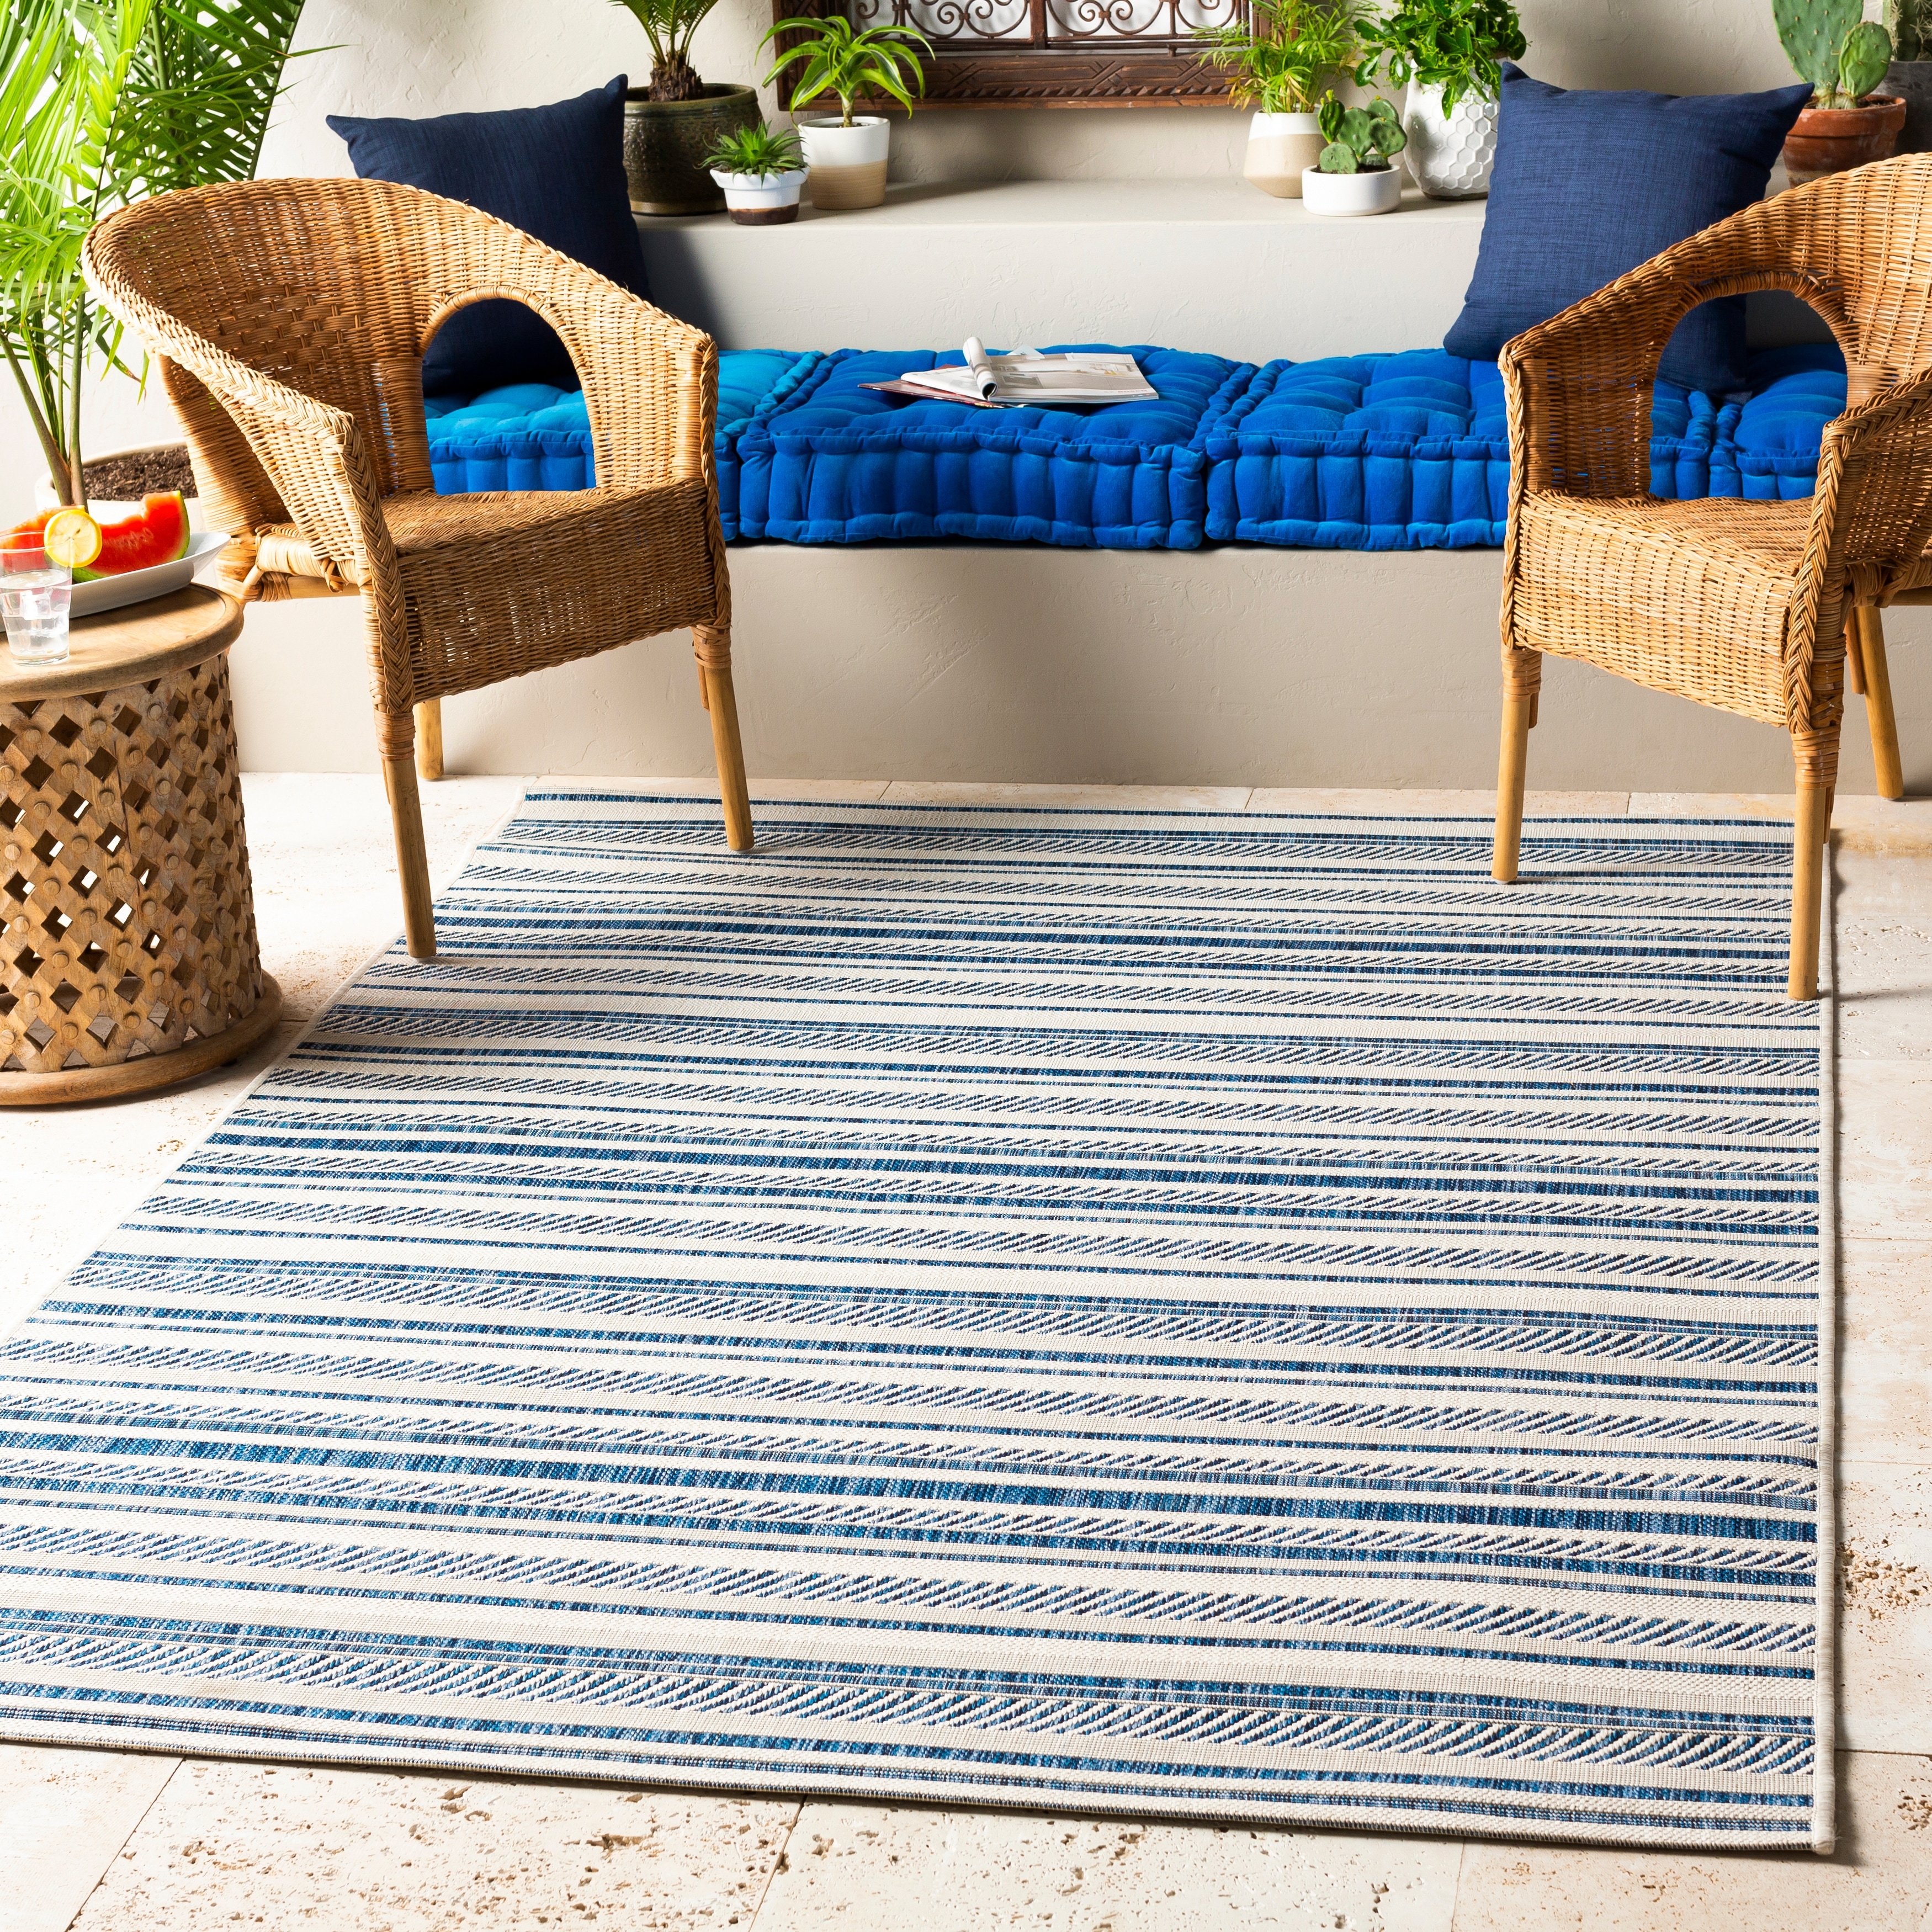 https://ak1.ostkcdn.com/images/products/is/images/direct/1821e3eb92b3965cf287a9279c279e6e1a39abbe/Rikard-Indoor--Outdoor-Coastal-Stripe-Area-Rug.jpg